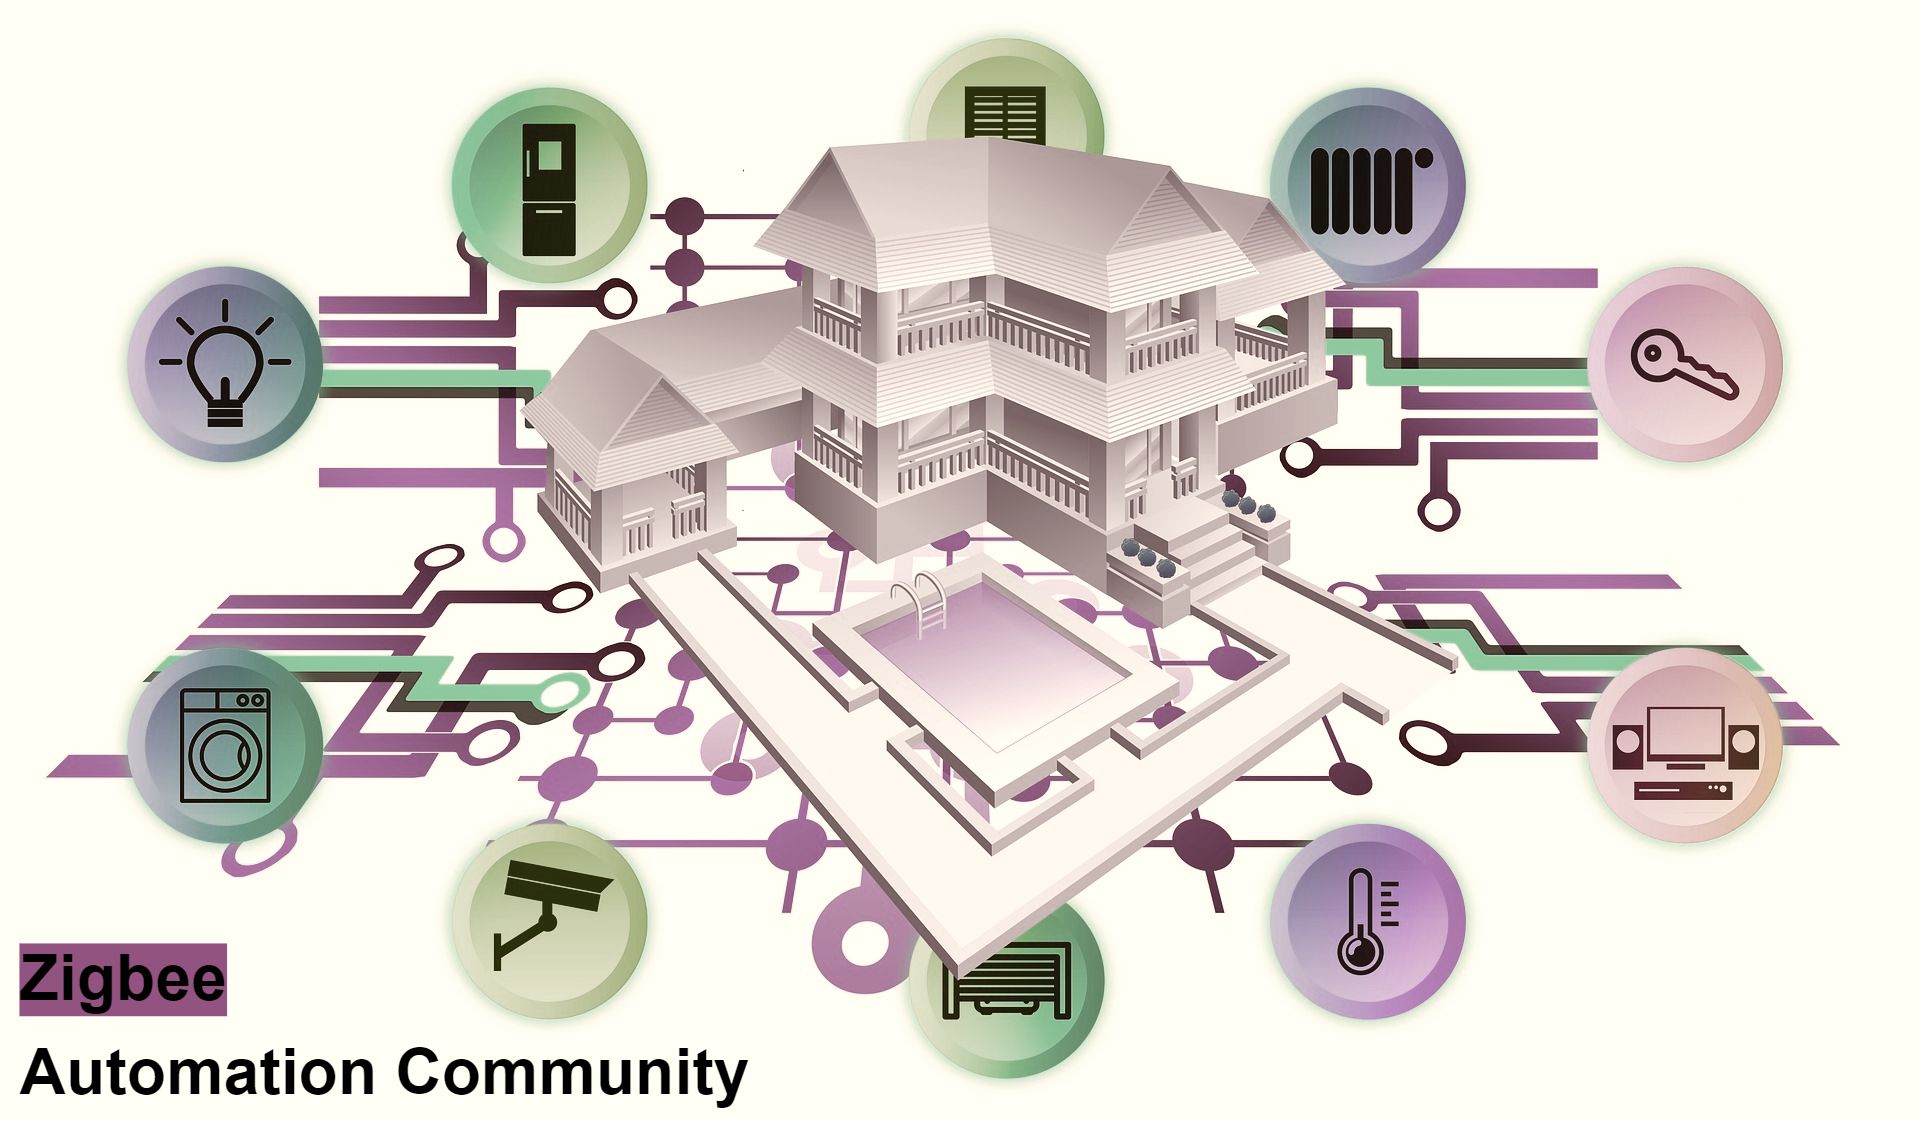 The power of Zigbee 3.0 for smart home and IoT devices